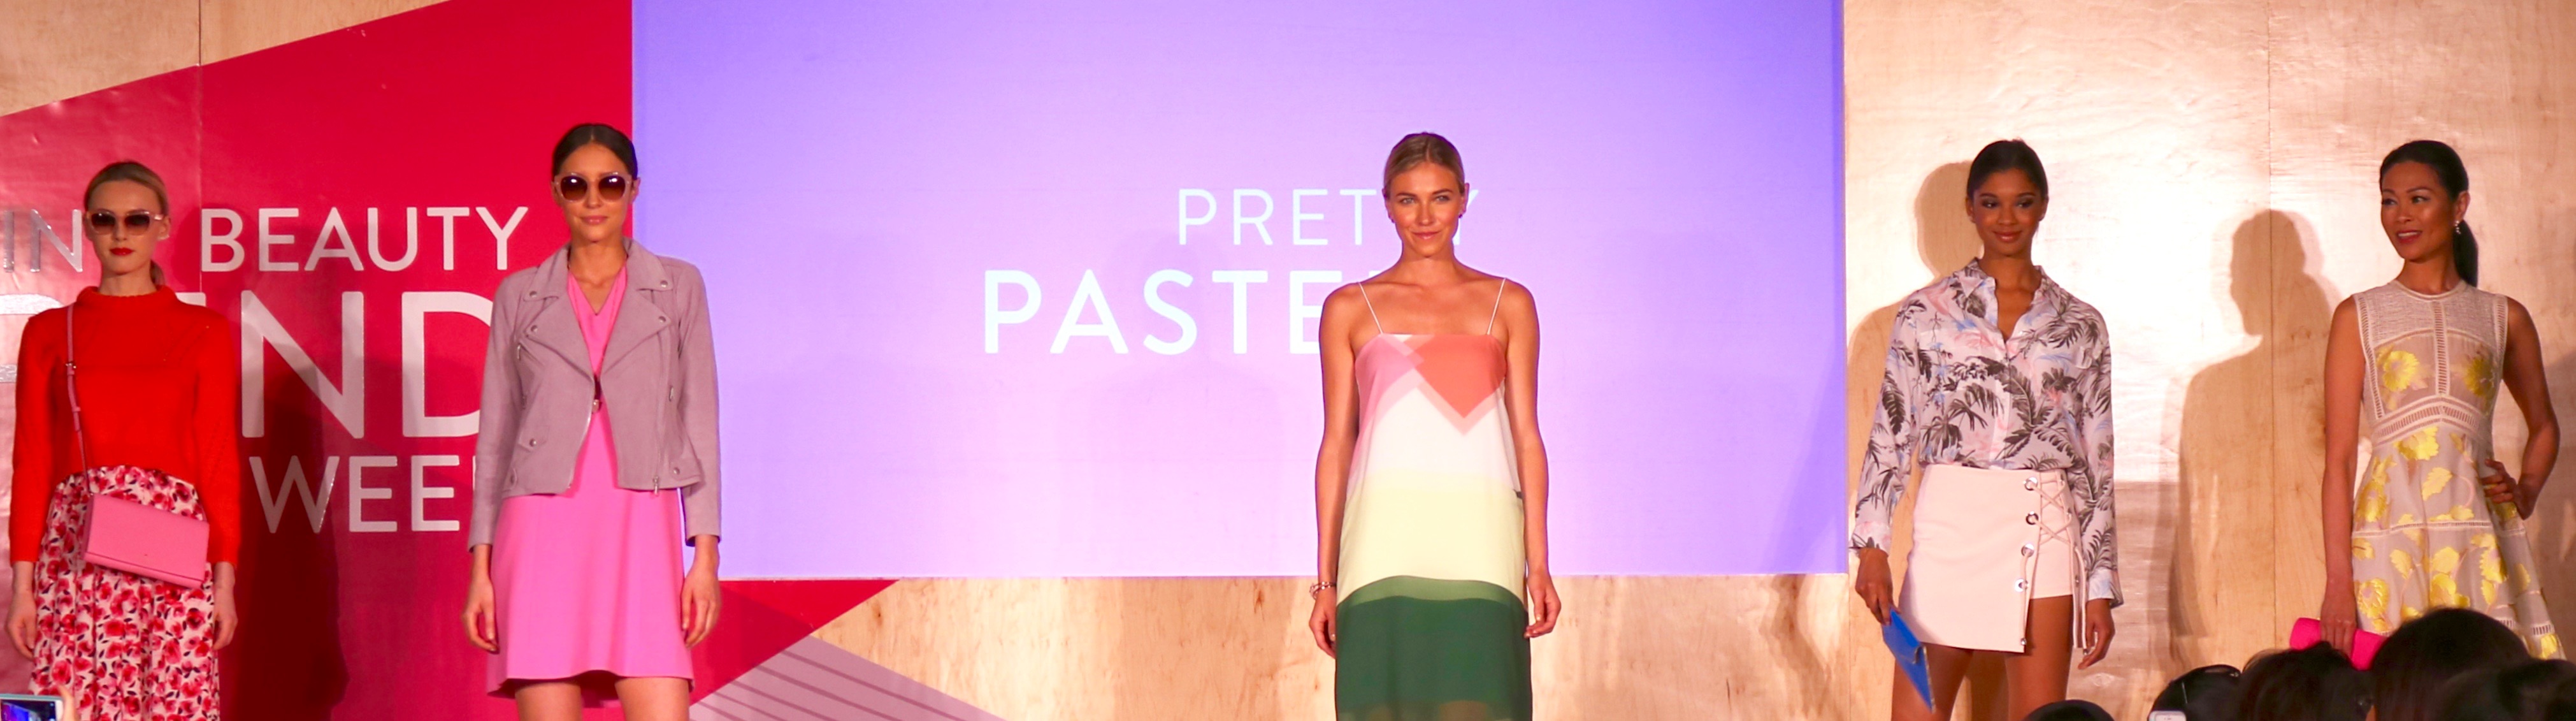 pretty pastels Nordstrom Beauty Trend Show 2016 Spring Bowtiful Life 3